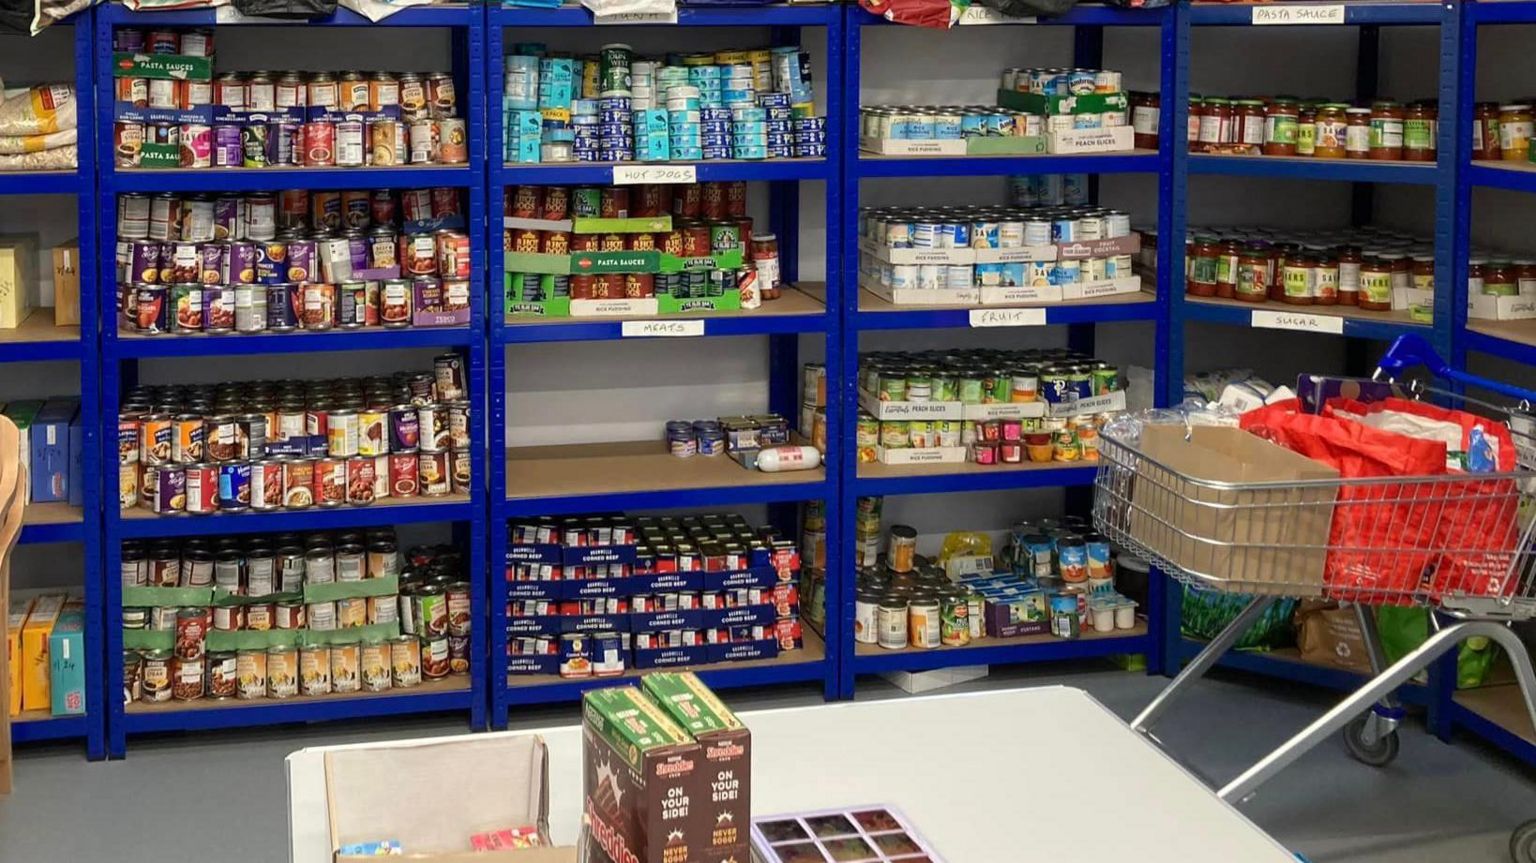 Shelving units filled with food